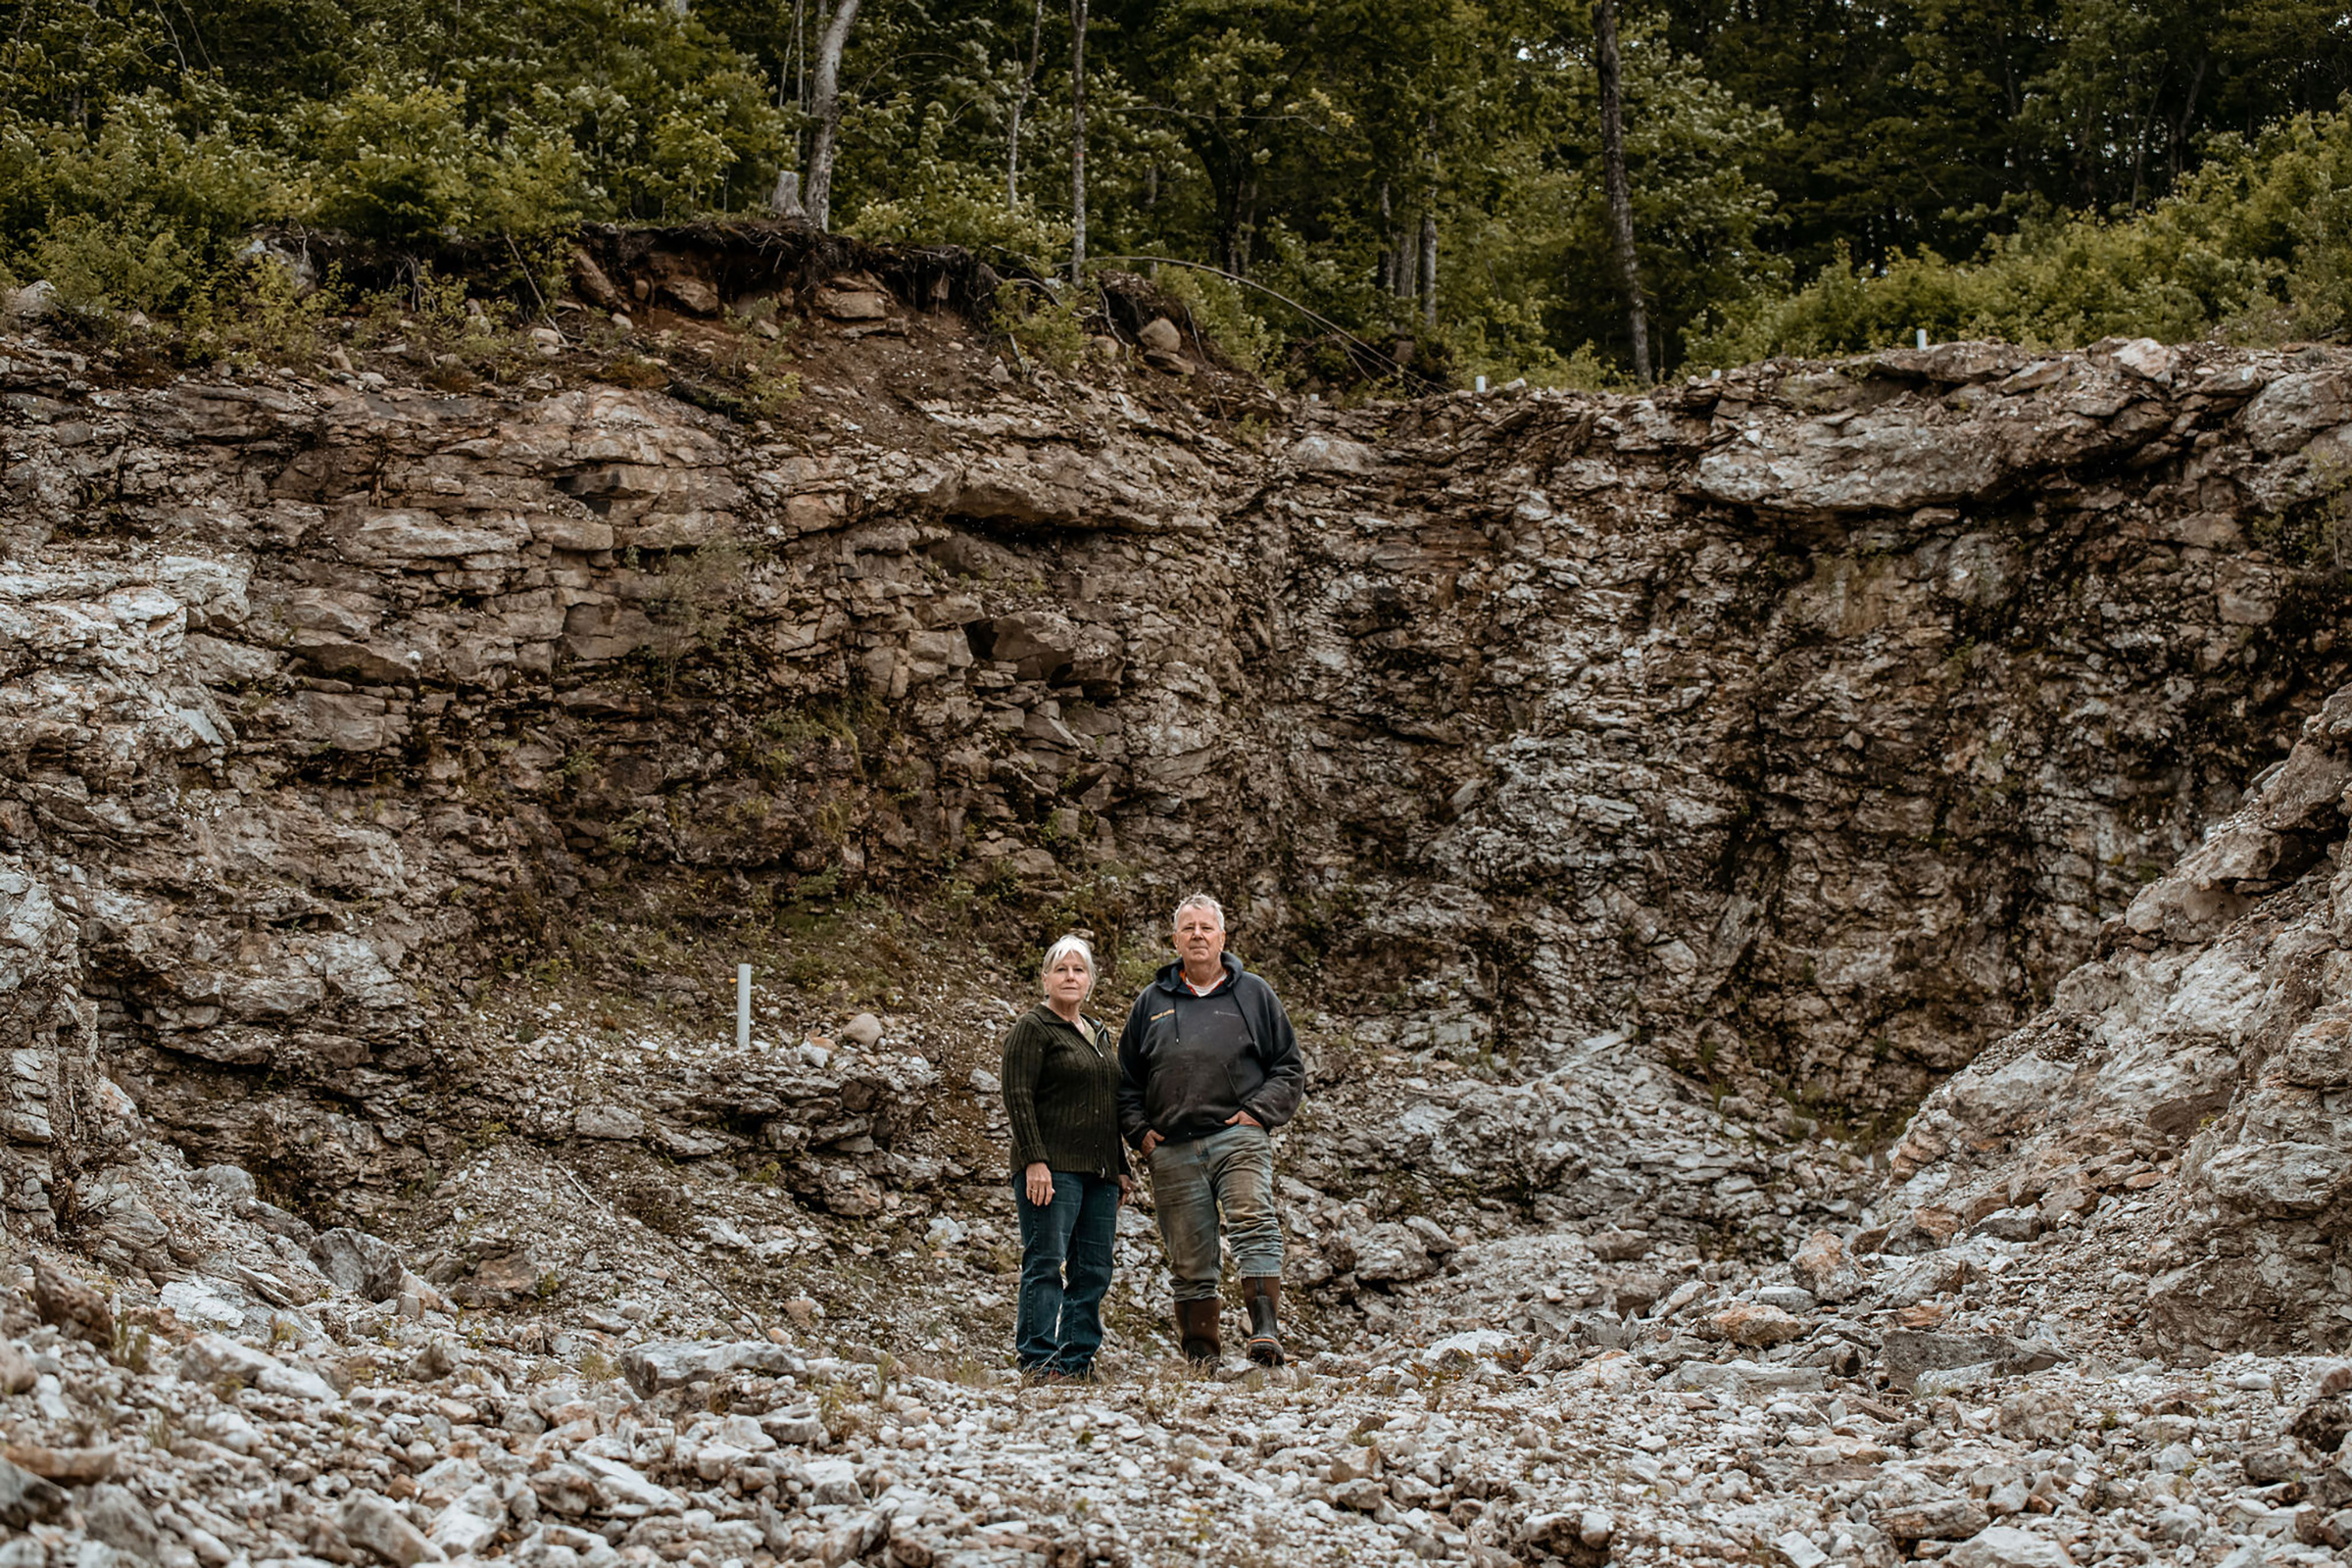 Mary and Gary Freeman stand in a pit in Newry, Maine, where they have excavated 700 tons of the lithium-bearing mineral spodumene under an exploratory permit, on June 6. The site, also known as Plumbago North, contains some of the largest specimens of  spodumene ever uncovered, with some measuring up to 36 feet in length. The state of Maine currently bars them from further extracting the rock. (Garrick Hoffman—The Maine Monitor)